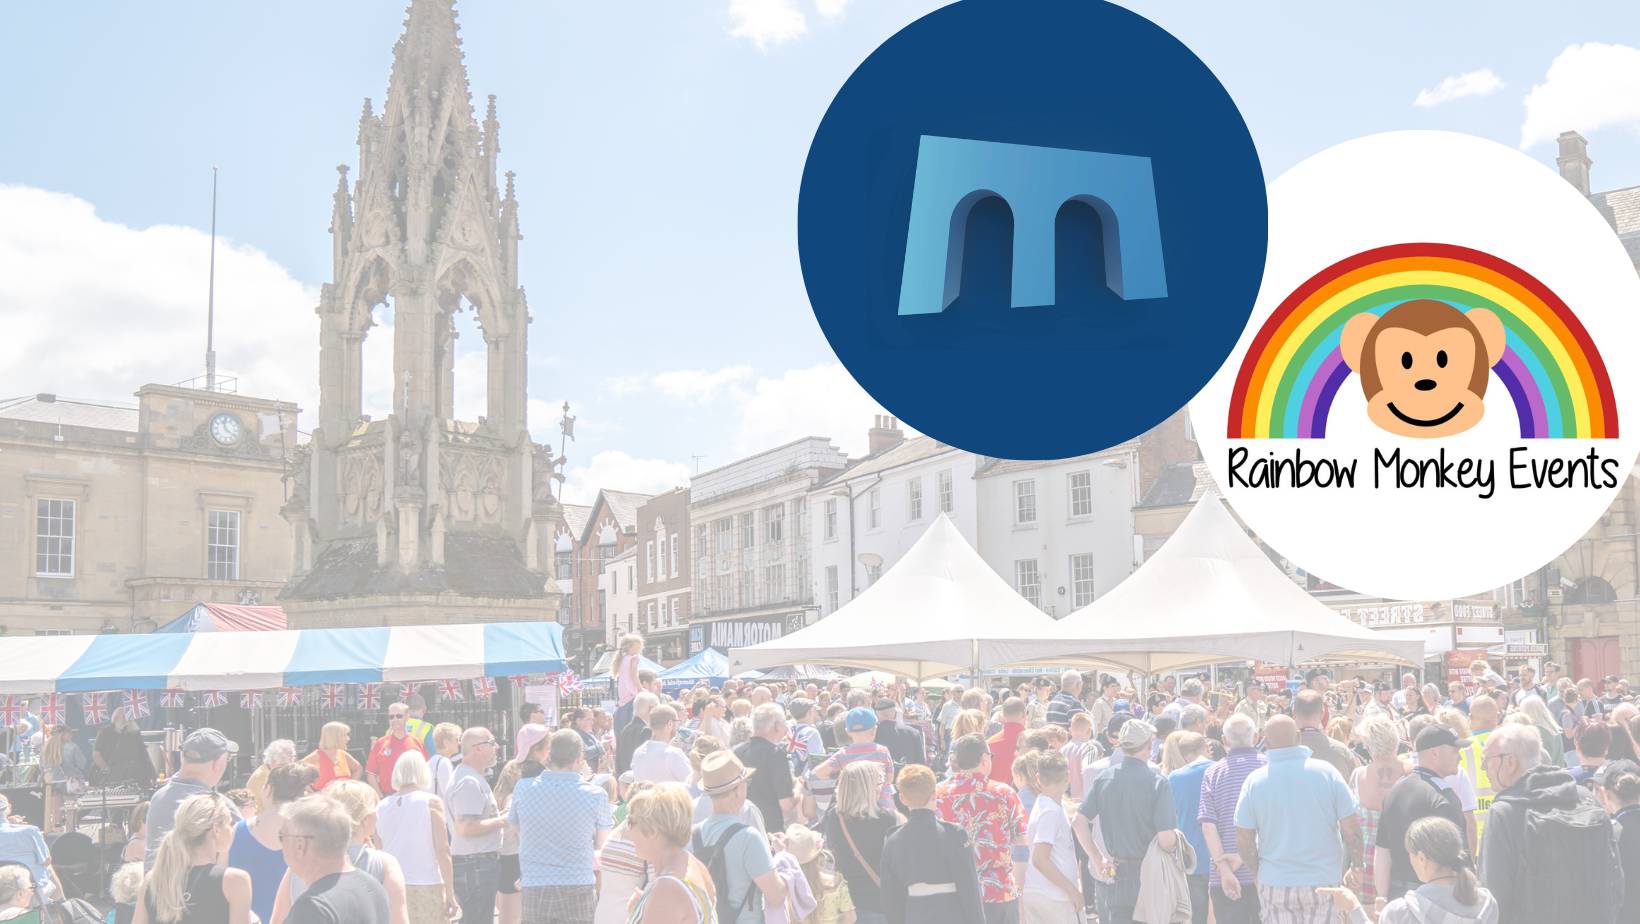 Faded image of market with BID and Rainbow Monkey events logos